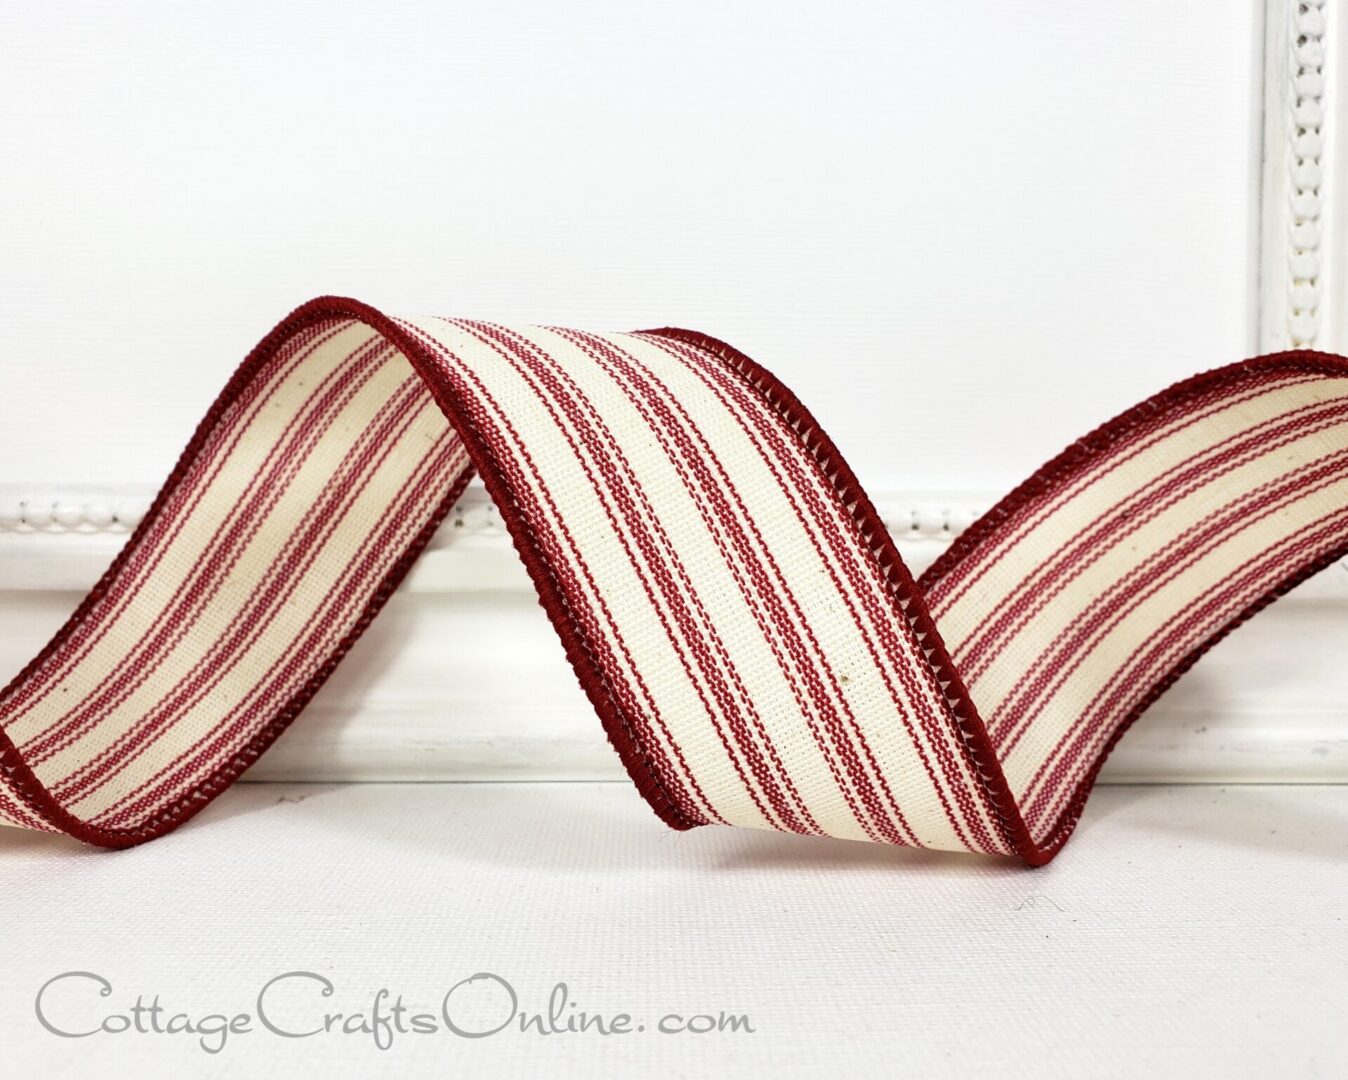 Burgundy and ivory ticking stripe 1.5" wide wired ribbon from the Etsy shop of Cottage Crafts Online.